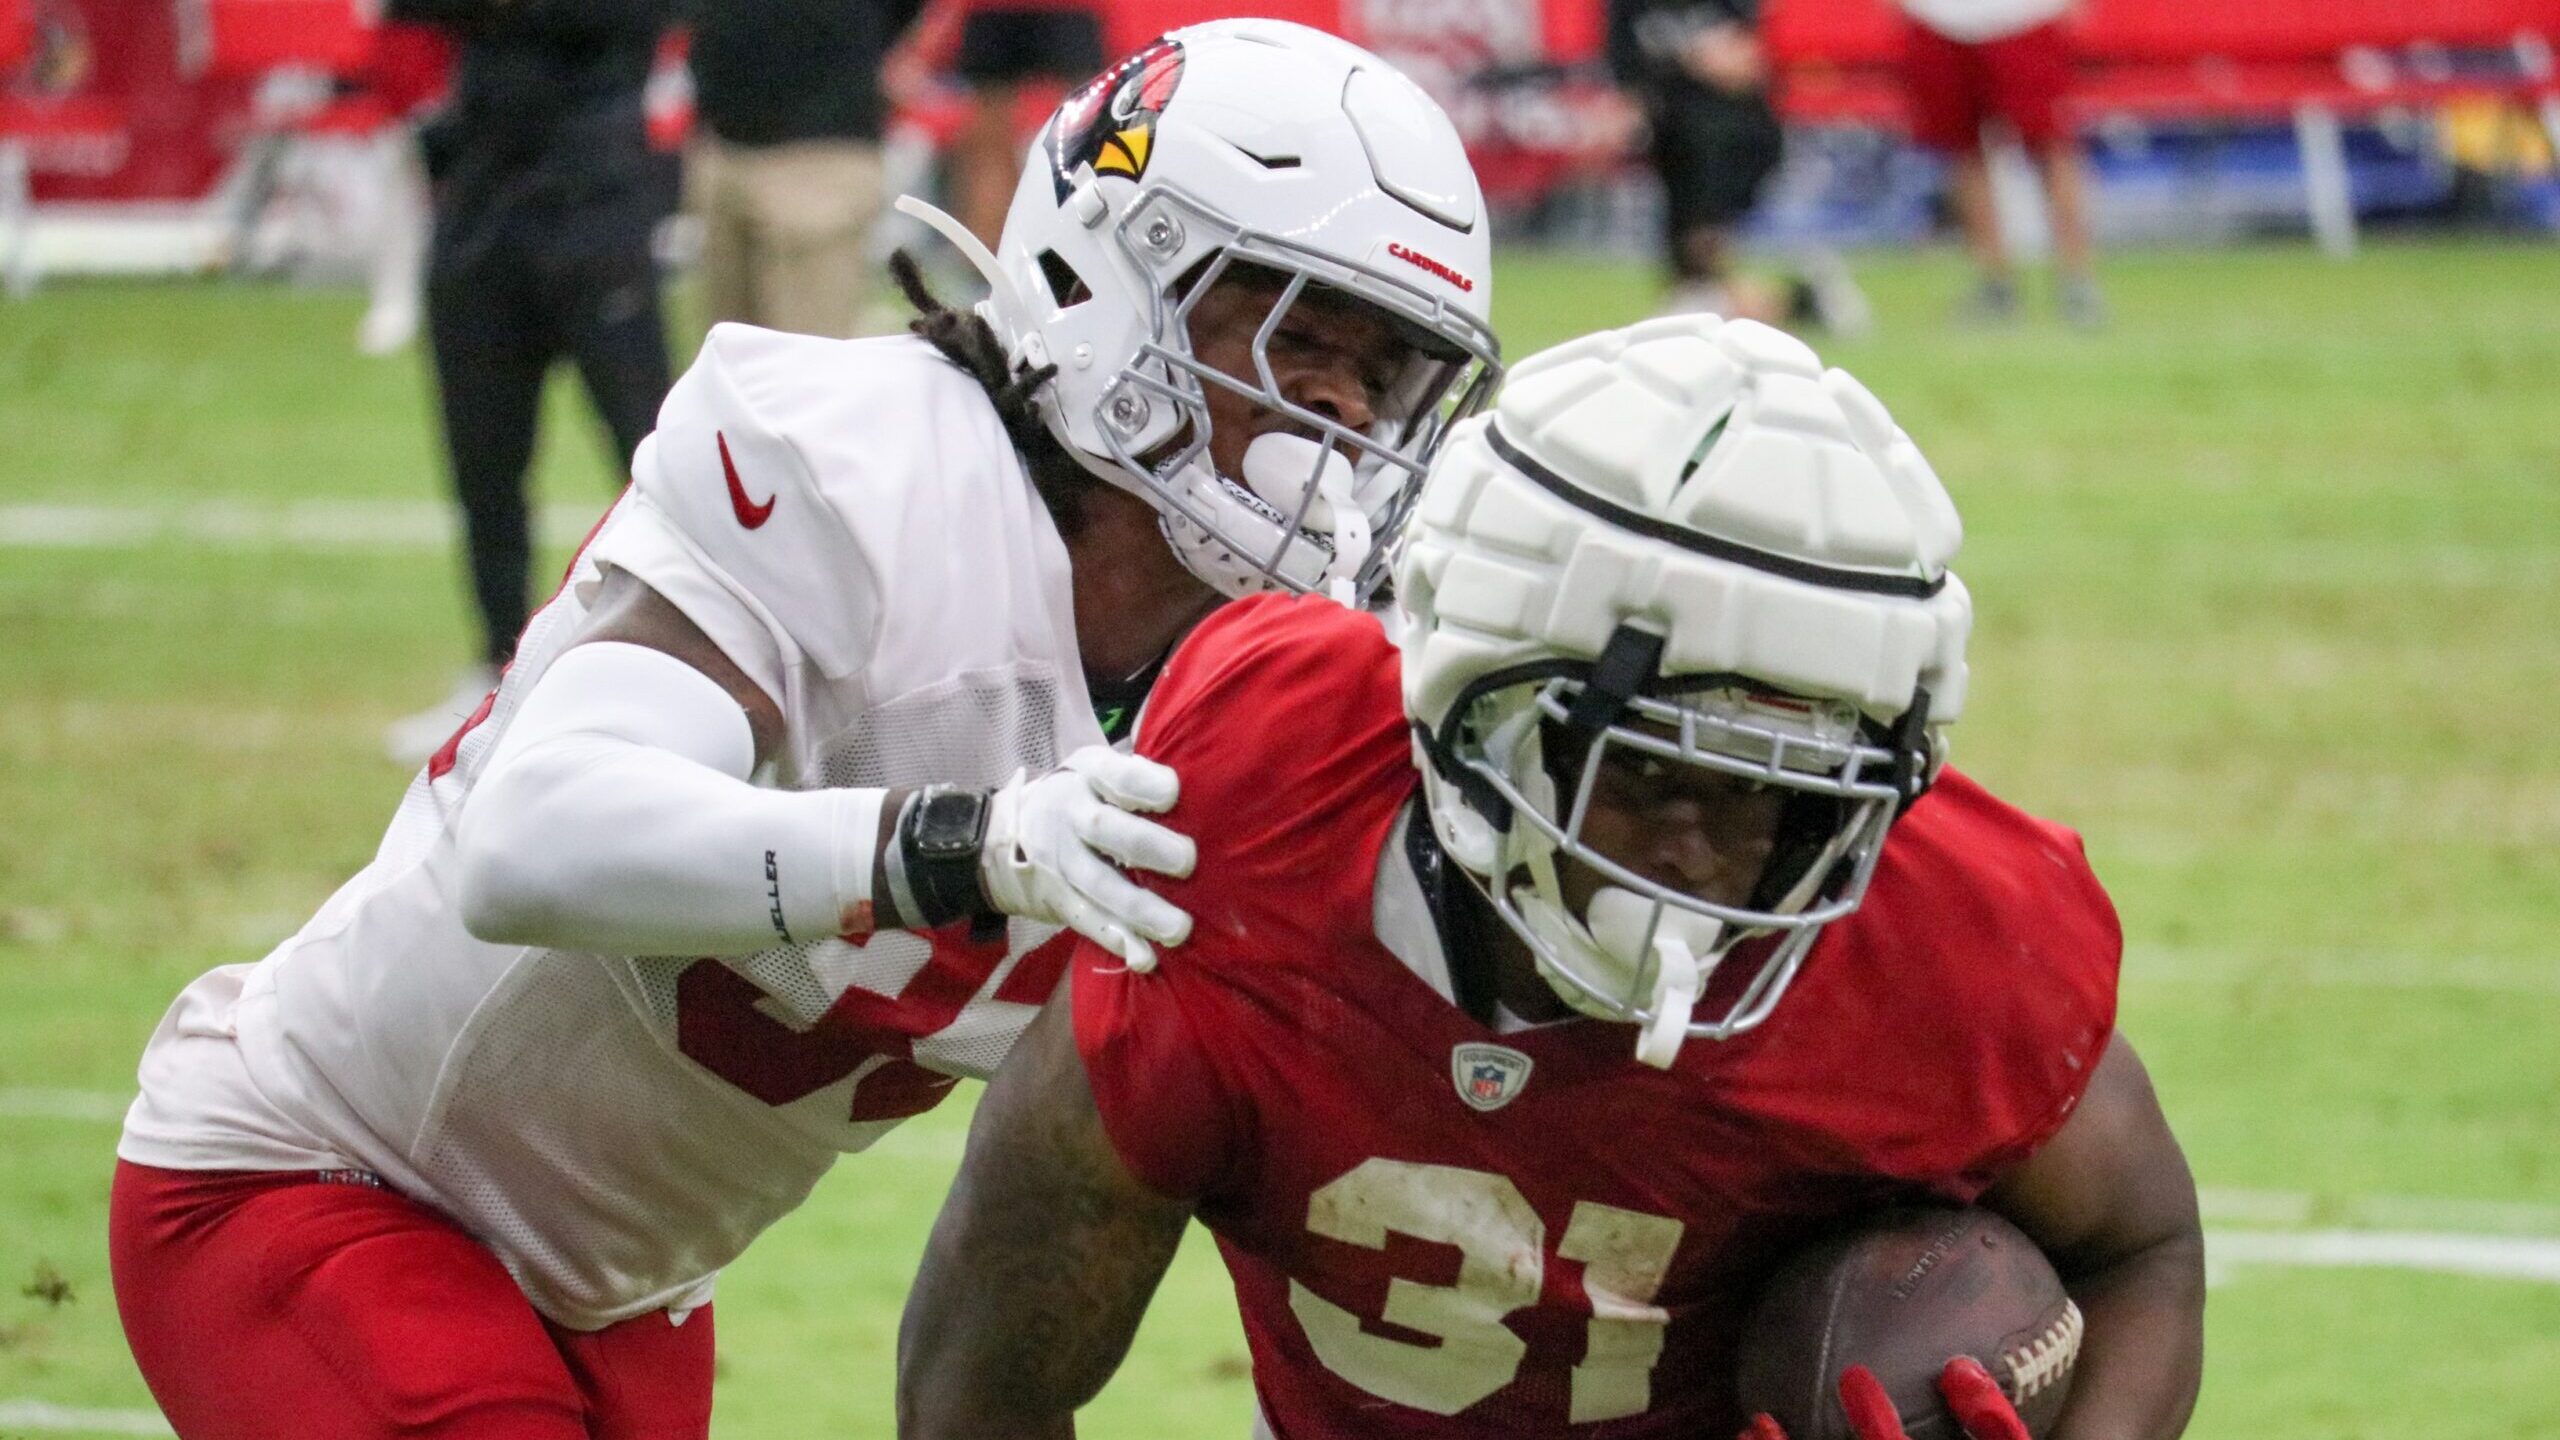 New era notes: Red & White practice gives Cardinals 1st real dress rehearsal